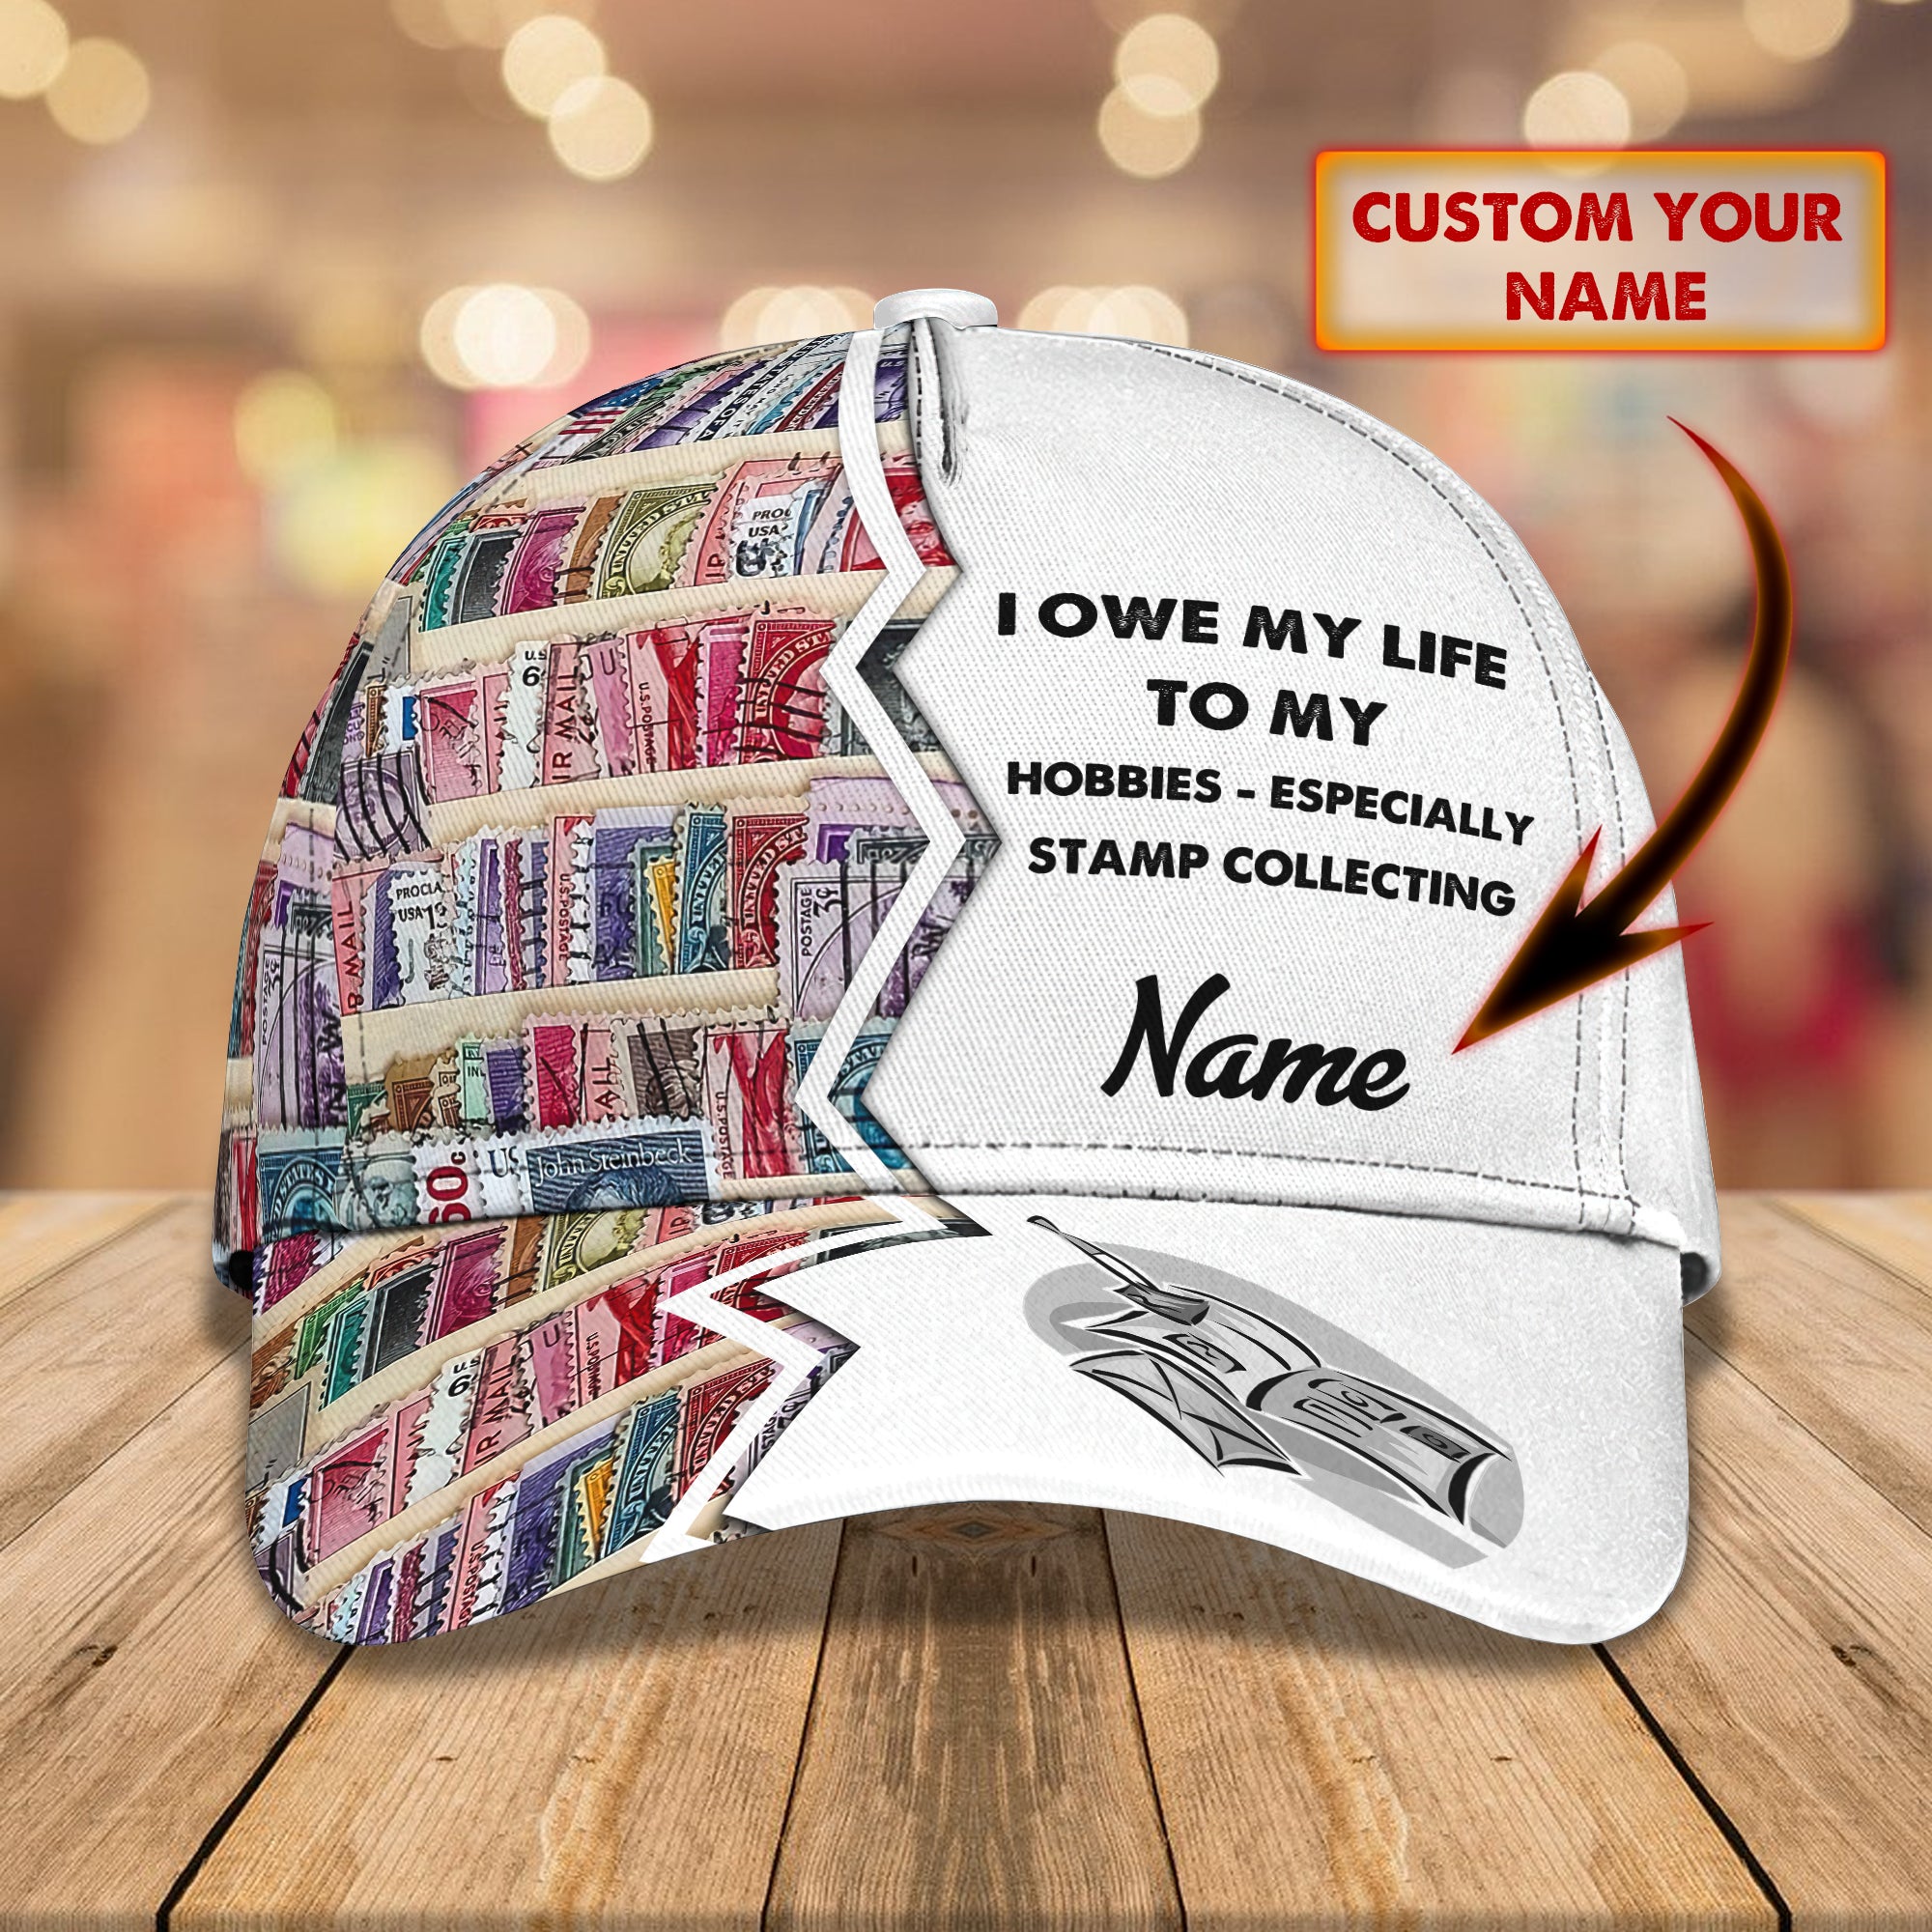 Stamp Collecting - Personalized Name Cap - Loop - H9h3-418